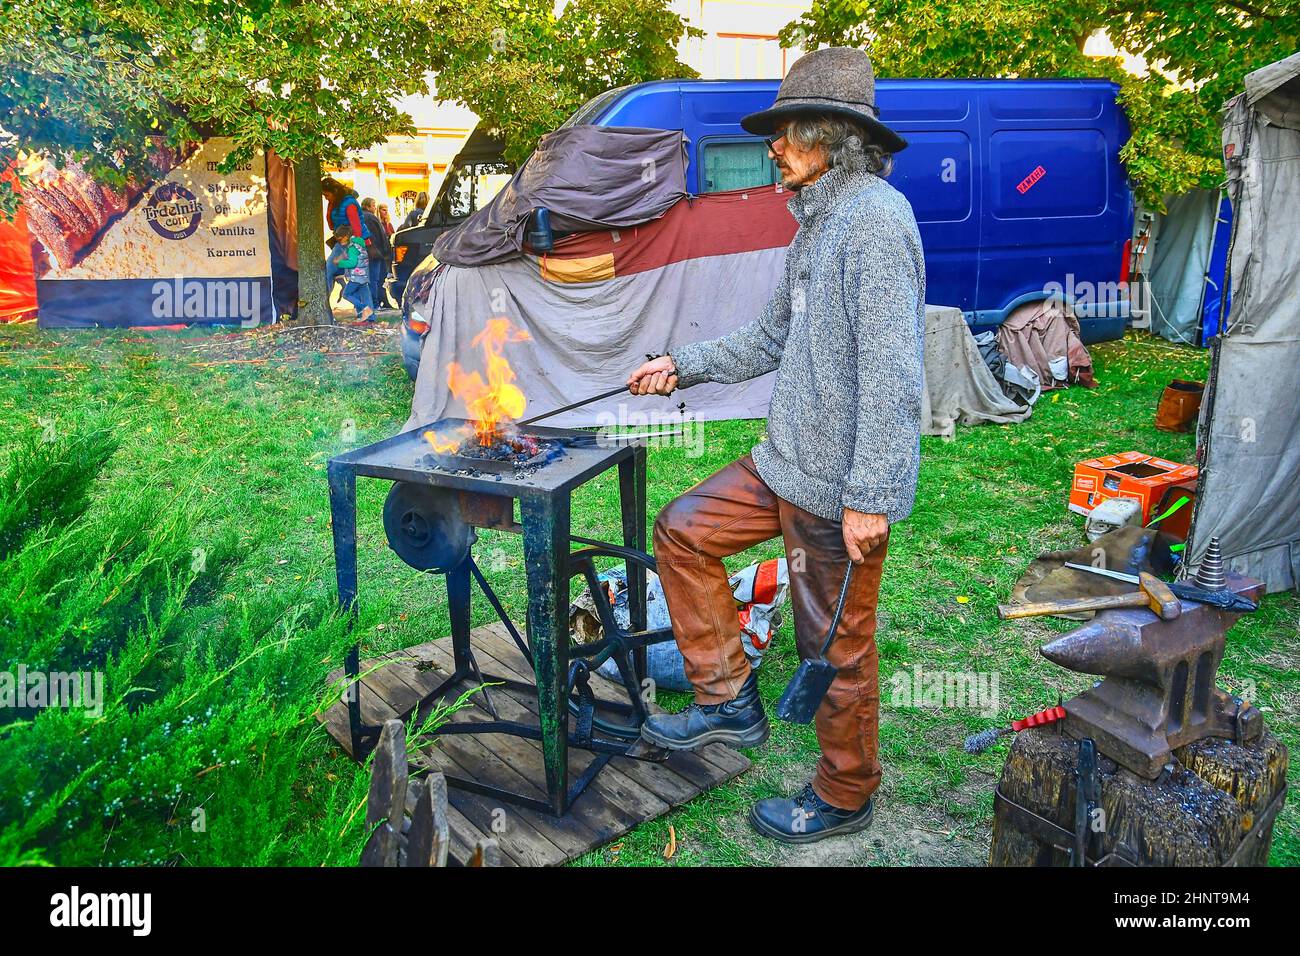 Street performer as blacksmith. Street performers can fool passersby and entertain tourists. Stock Photo